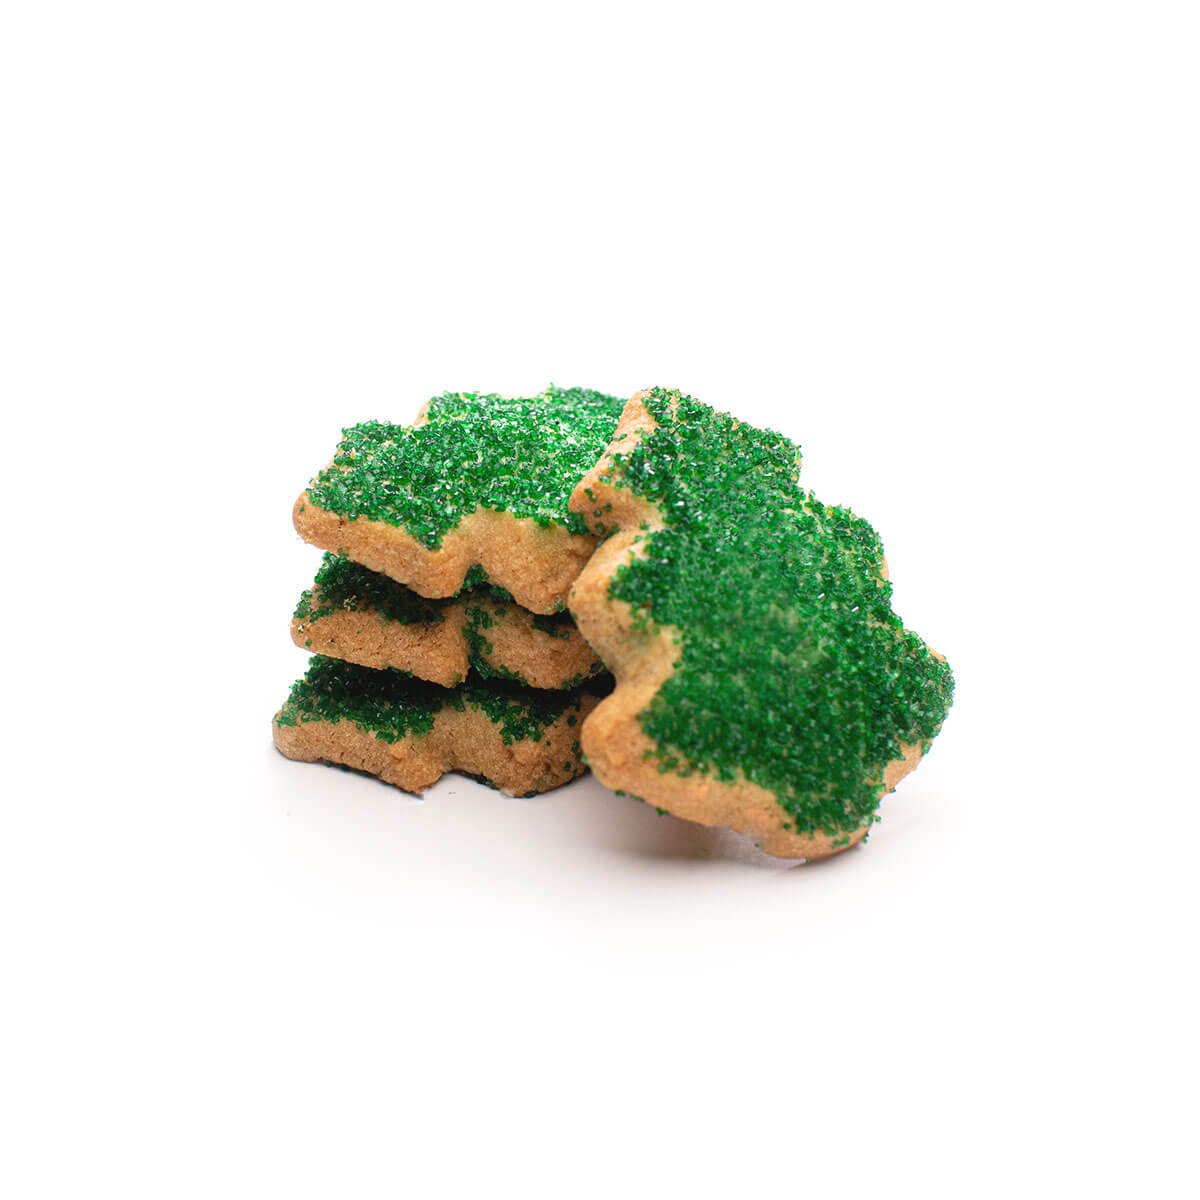 A buttery cookie with a Christmas tree shape sprinkled with green crystal sugar.